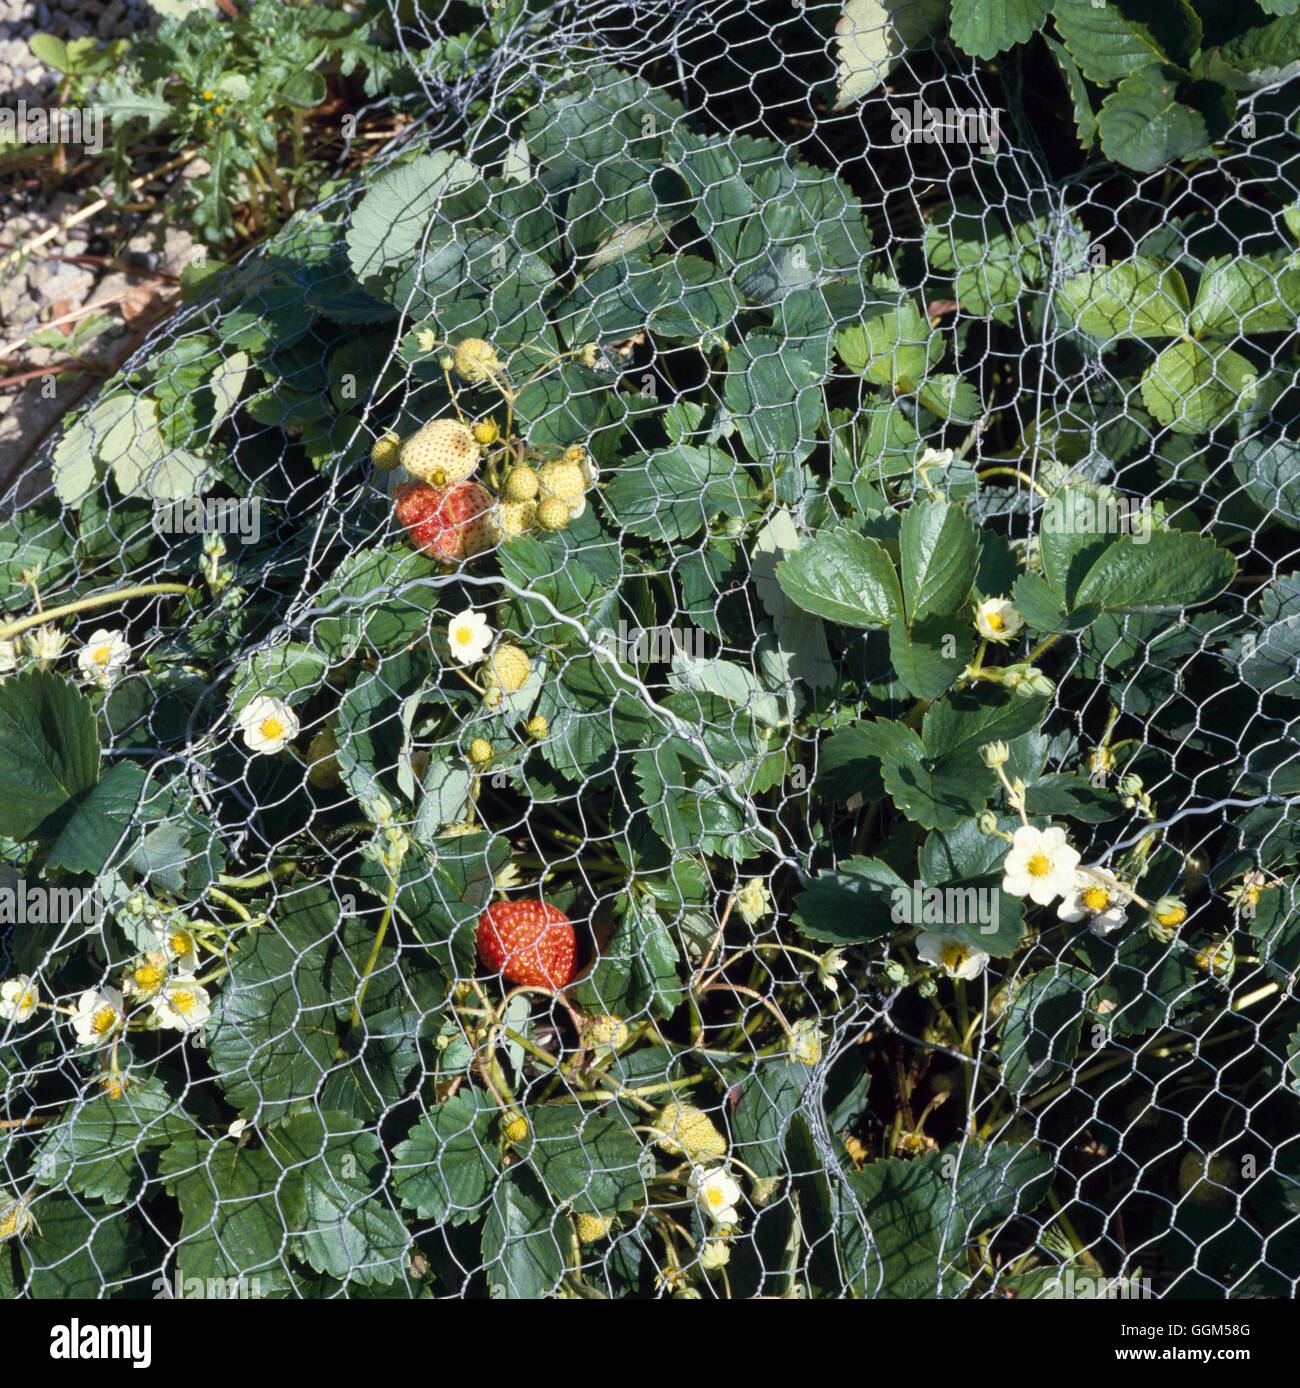 Protection Against Pests - Strawberries protected from birds by wire-netting. (Strawberry `Bogota')   TAS012485  Compu Stock Photo